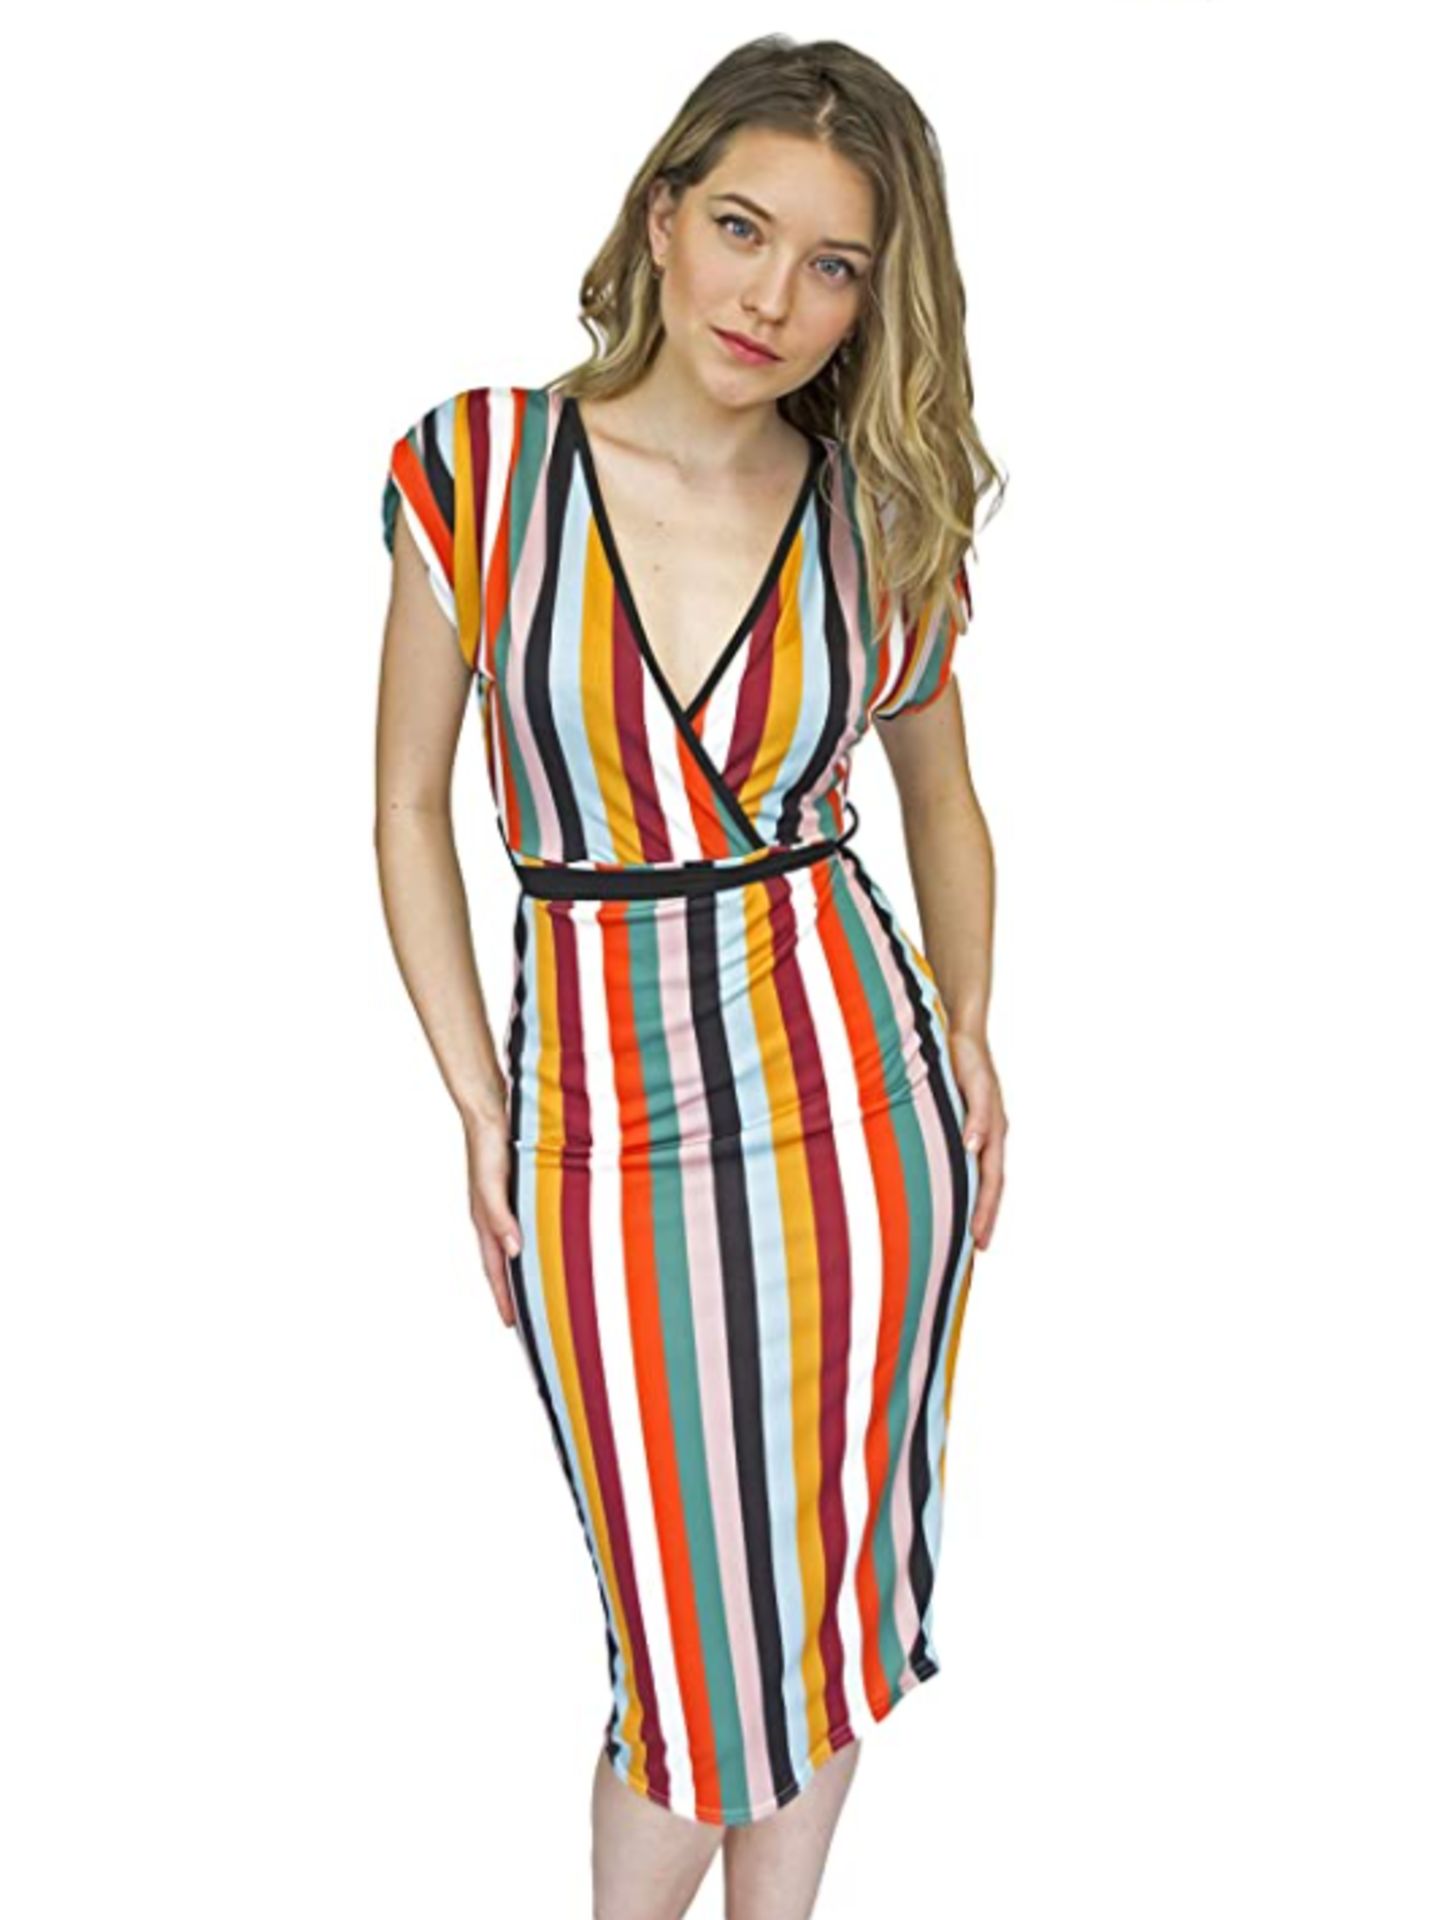 30 x New Women's Party Going Out Dresses Clothing Ladieswear Fashion Mini Maxi Styles - Image 3 of 5